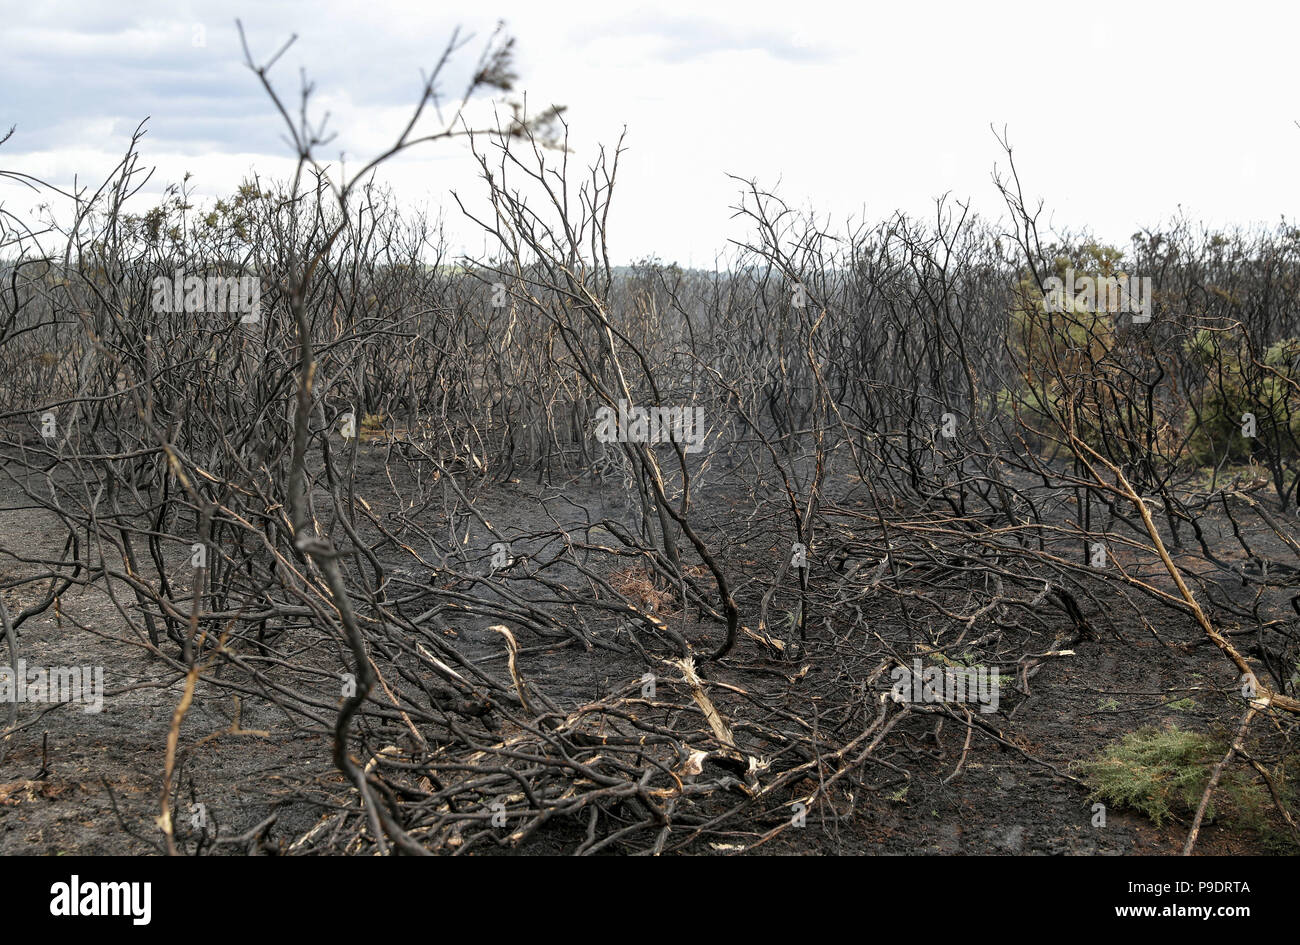 A view of fire damaged gorse on heathland near to Holbury in the New Forest, Hampshire. Stock Photo